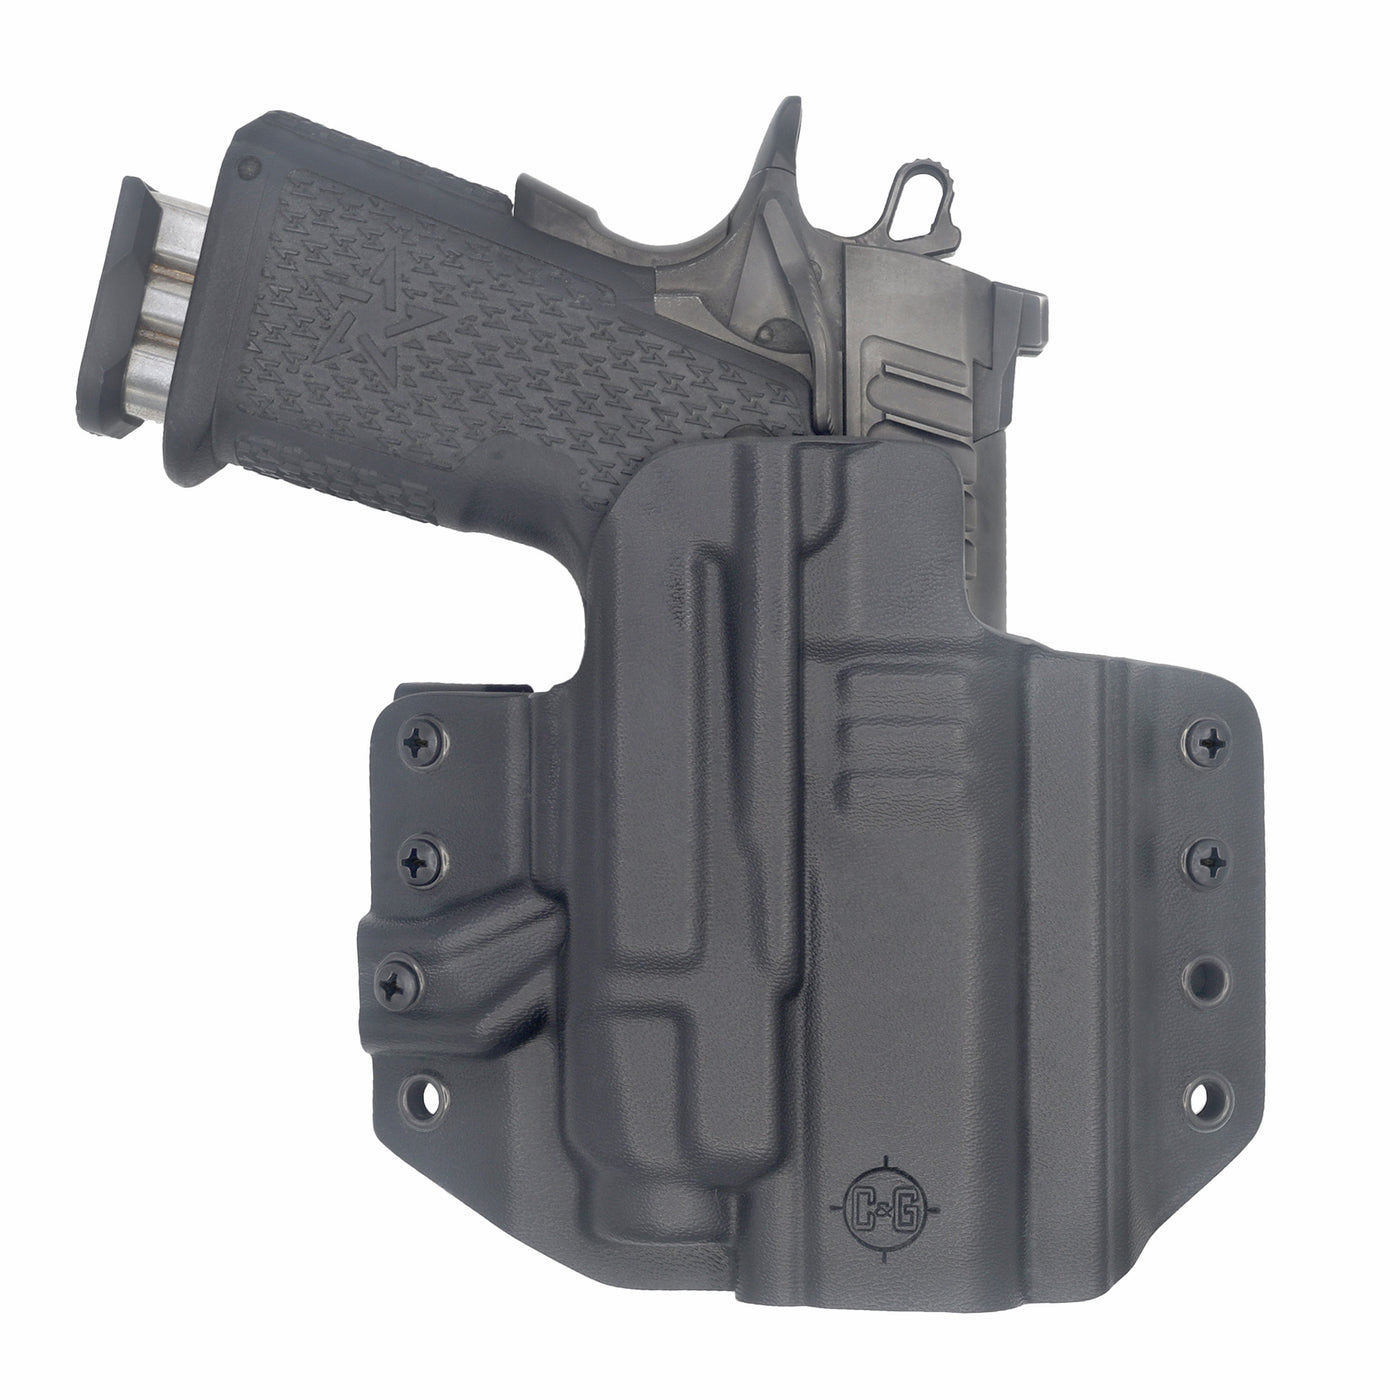 C&G Holsters custom OWB Tactical 1911 Streamlight TLR7/a in holstered position